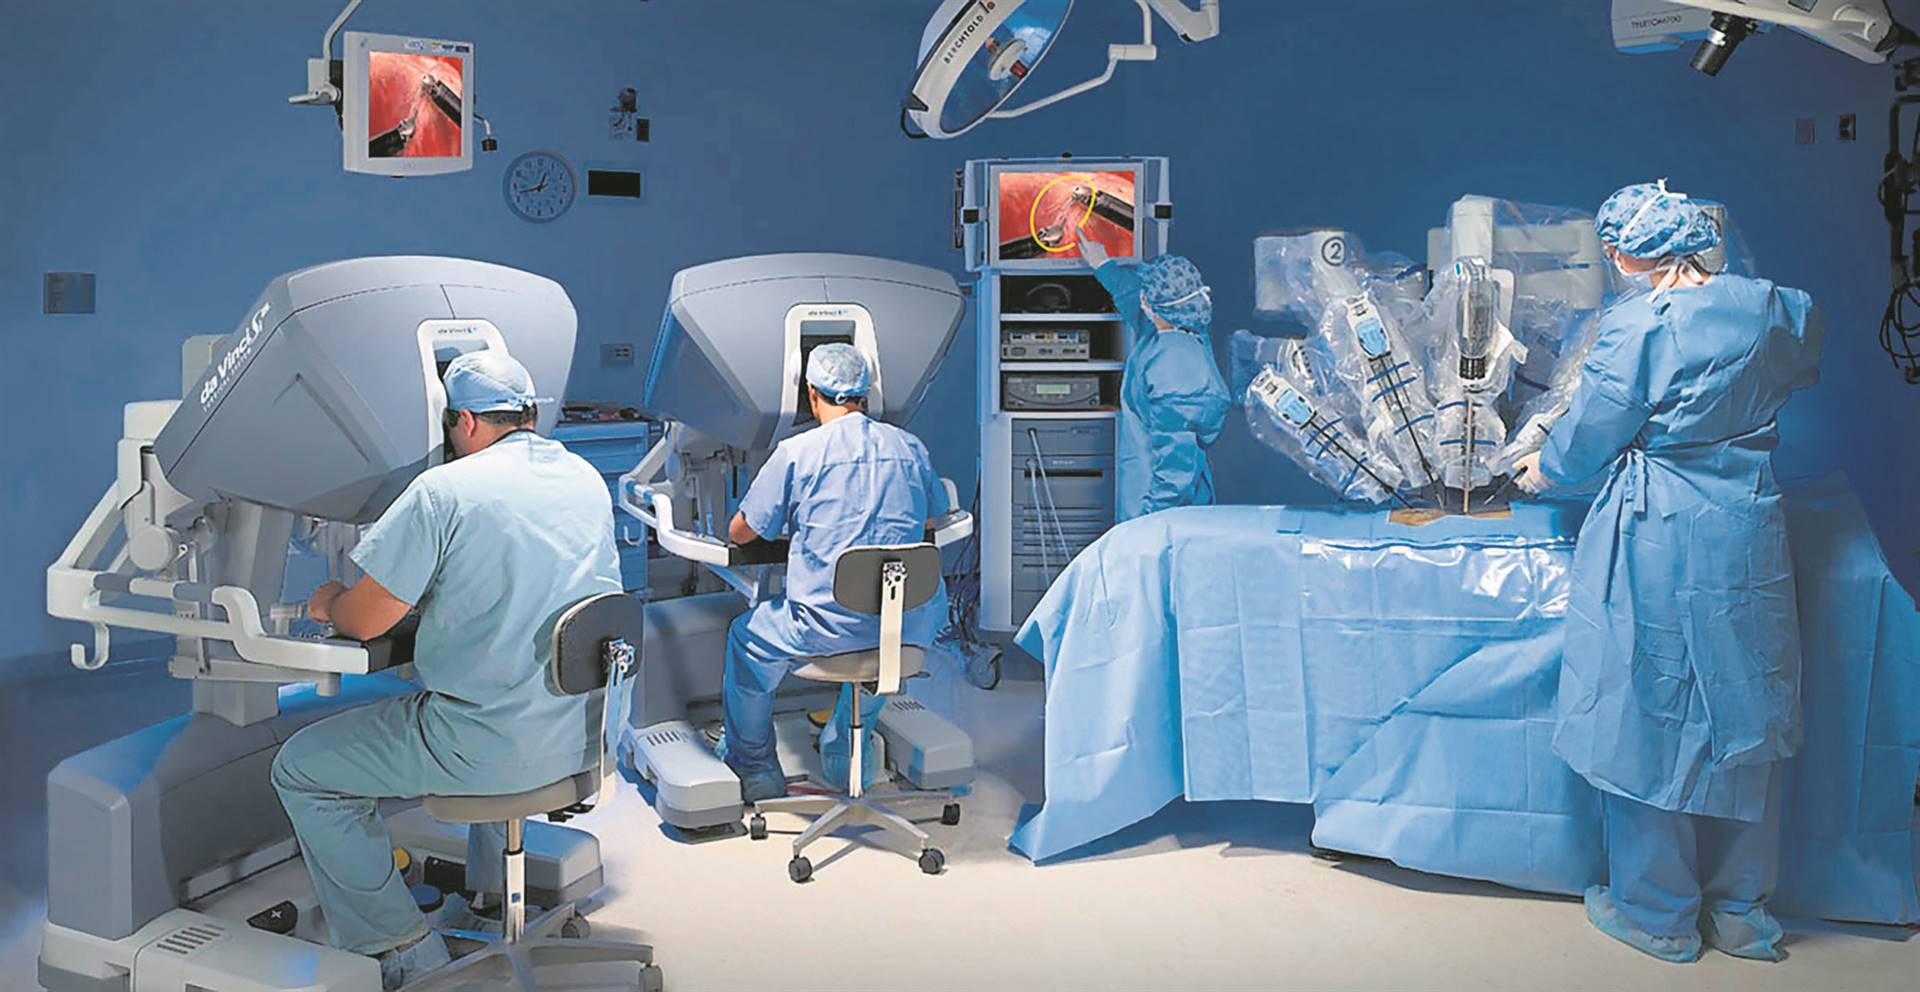 JOHANNESBURG SURGICAL HOSPITAL: The robotic Da Vinci Surgical Systems will be in operation.